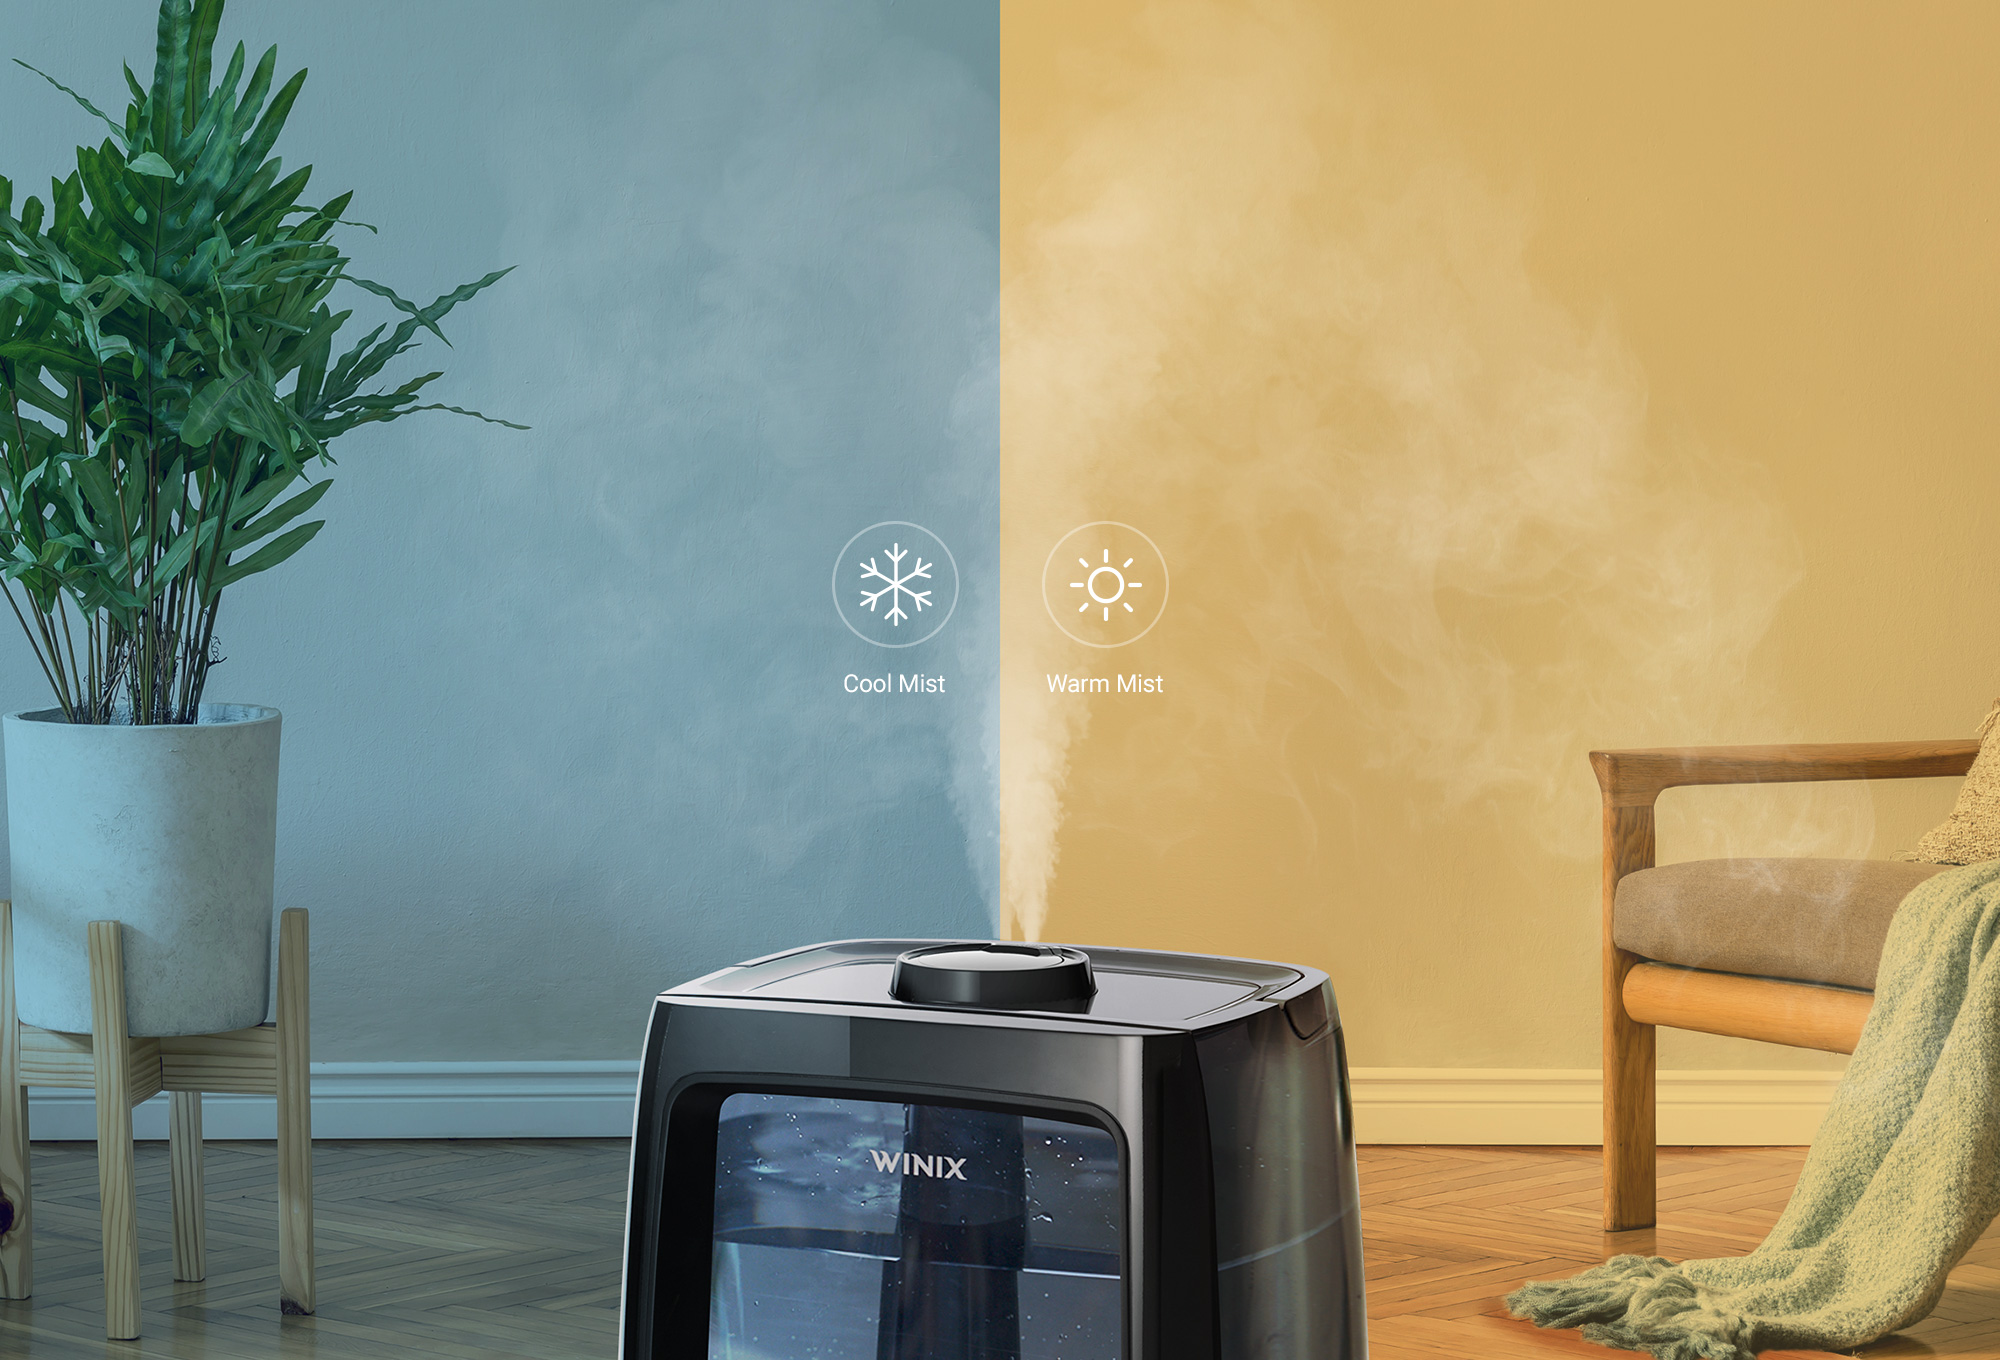 L200 humidifier split screen showing Cool or Warm Mist and text saying Cool mist and Warm Mist